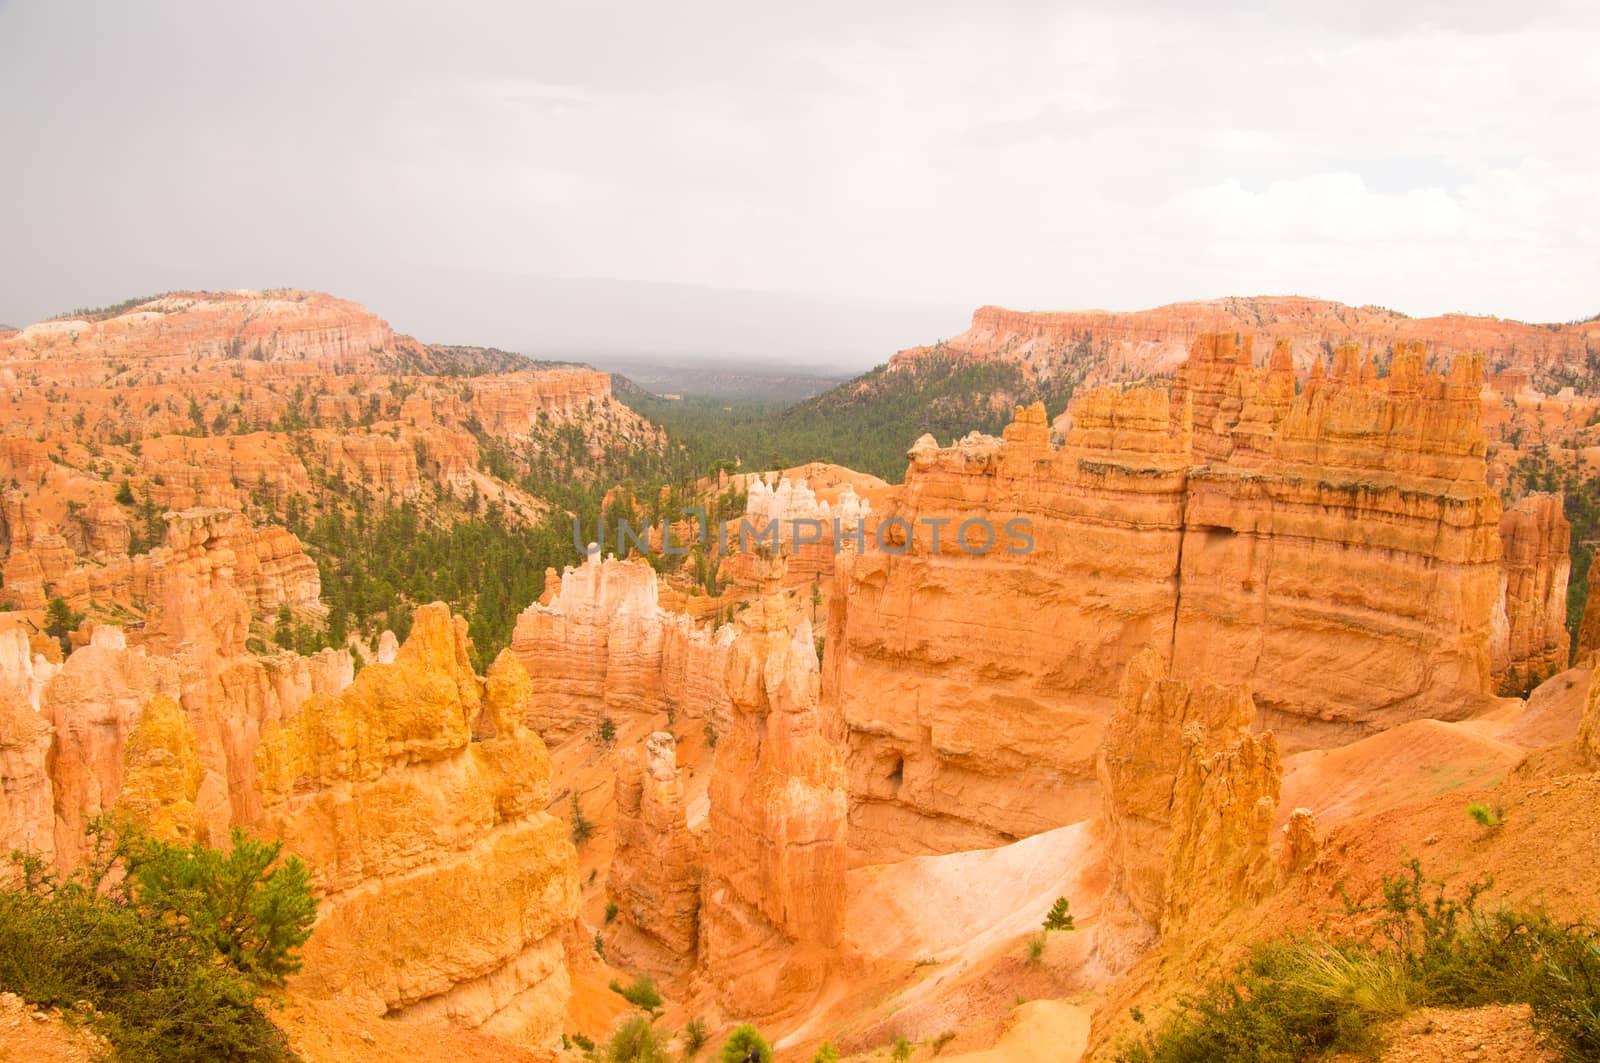 Bryce Canyon after the Summer rains by emattil